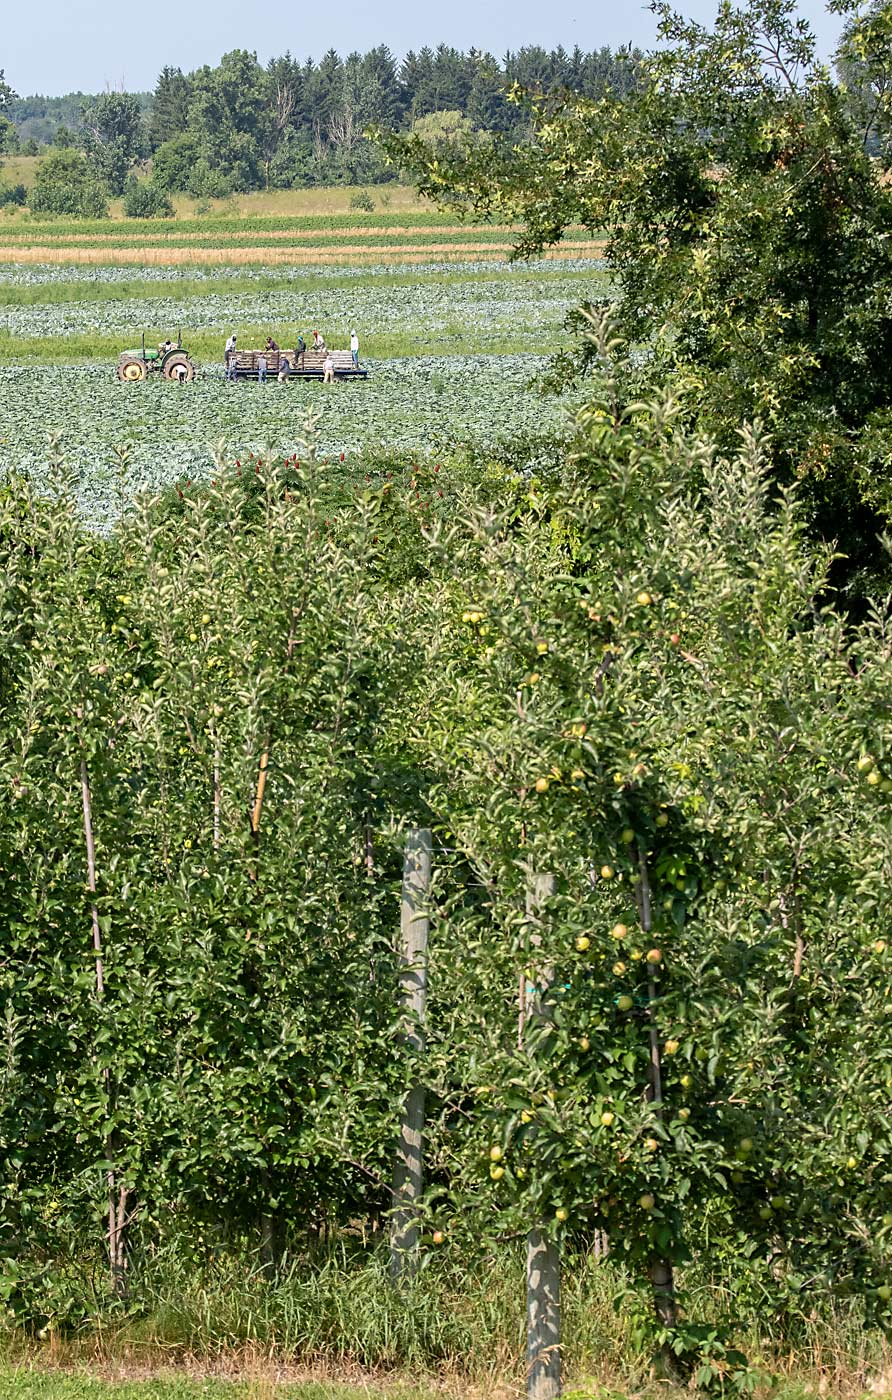 From Chris Hedge's apple orchard in Norfolk County, Ontario, international farmworkers can be seen harvesting cabbage on a neighbor's farm. Hedges praised the Seasonal Agricultural Worker Program, but wished it offered growers the flexibility to share workers with neighbors, especially this year as the COVID 19 pandemic delayed workers and created a spring labor crisis for many Canadian fruit and vegetable growers who rely heavily of seasonal workers from Mexico and the Caribbean. (TJ Mullinax/Good Fruit Grower)